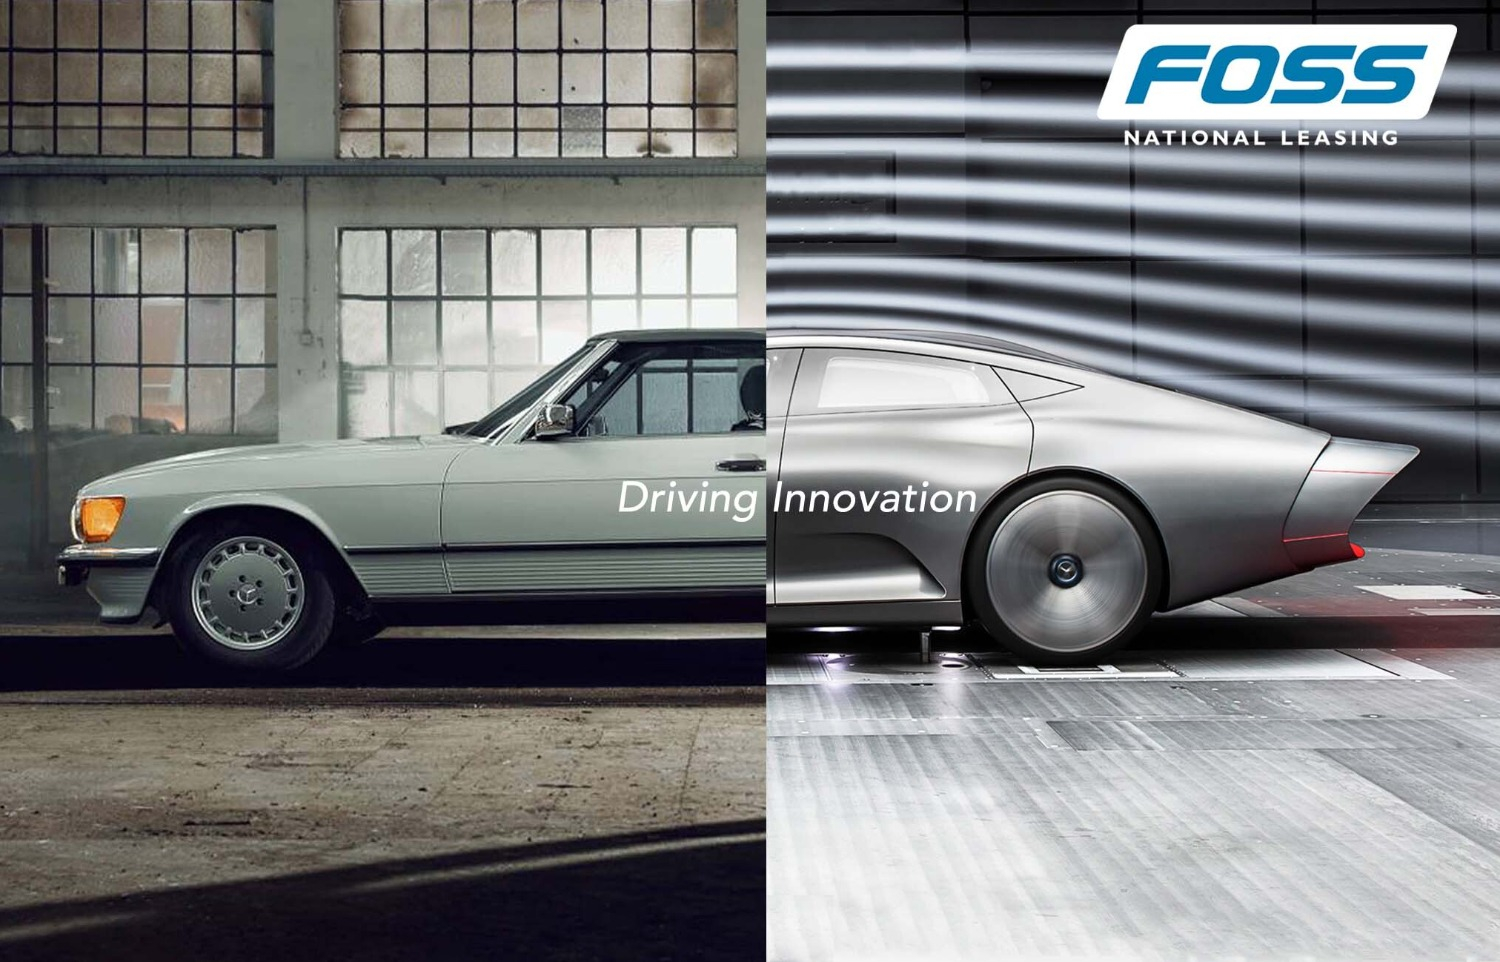 How Foss National Leasing Has Changed Over the Years and Is Driving Innovation in Fleet Management